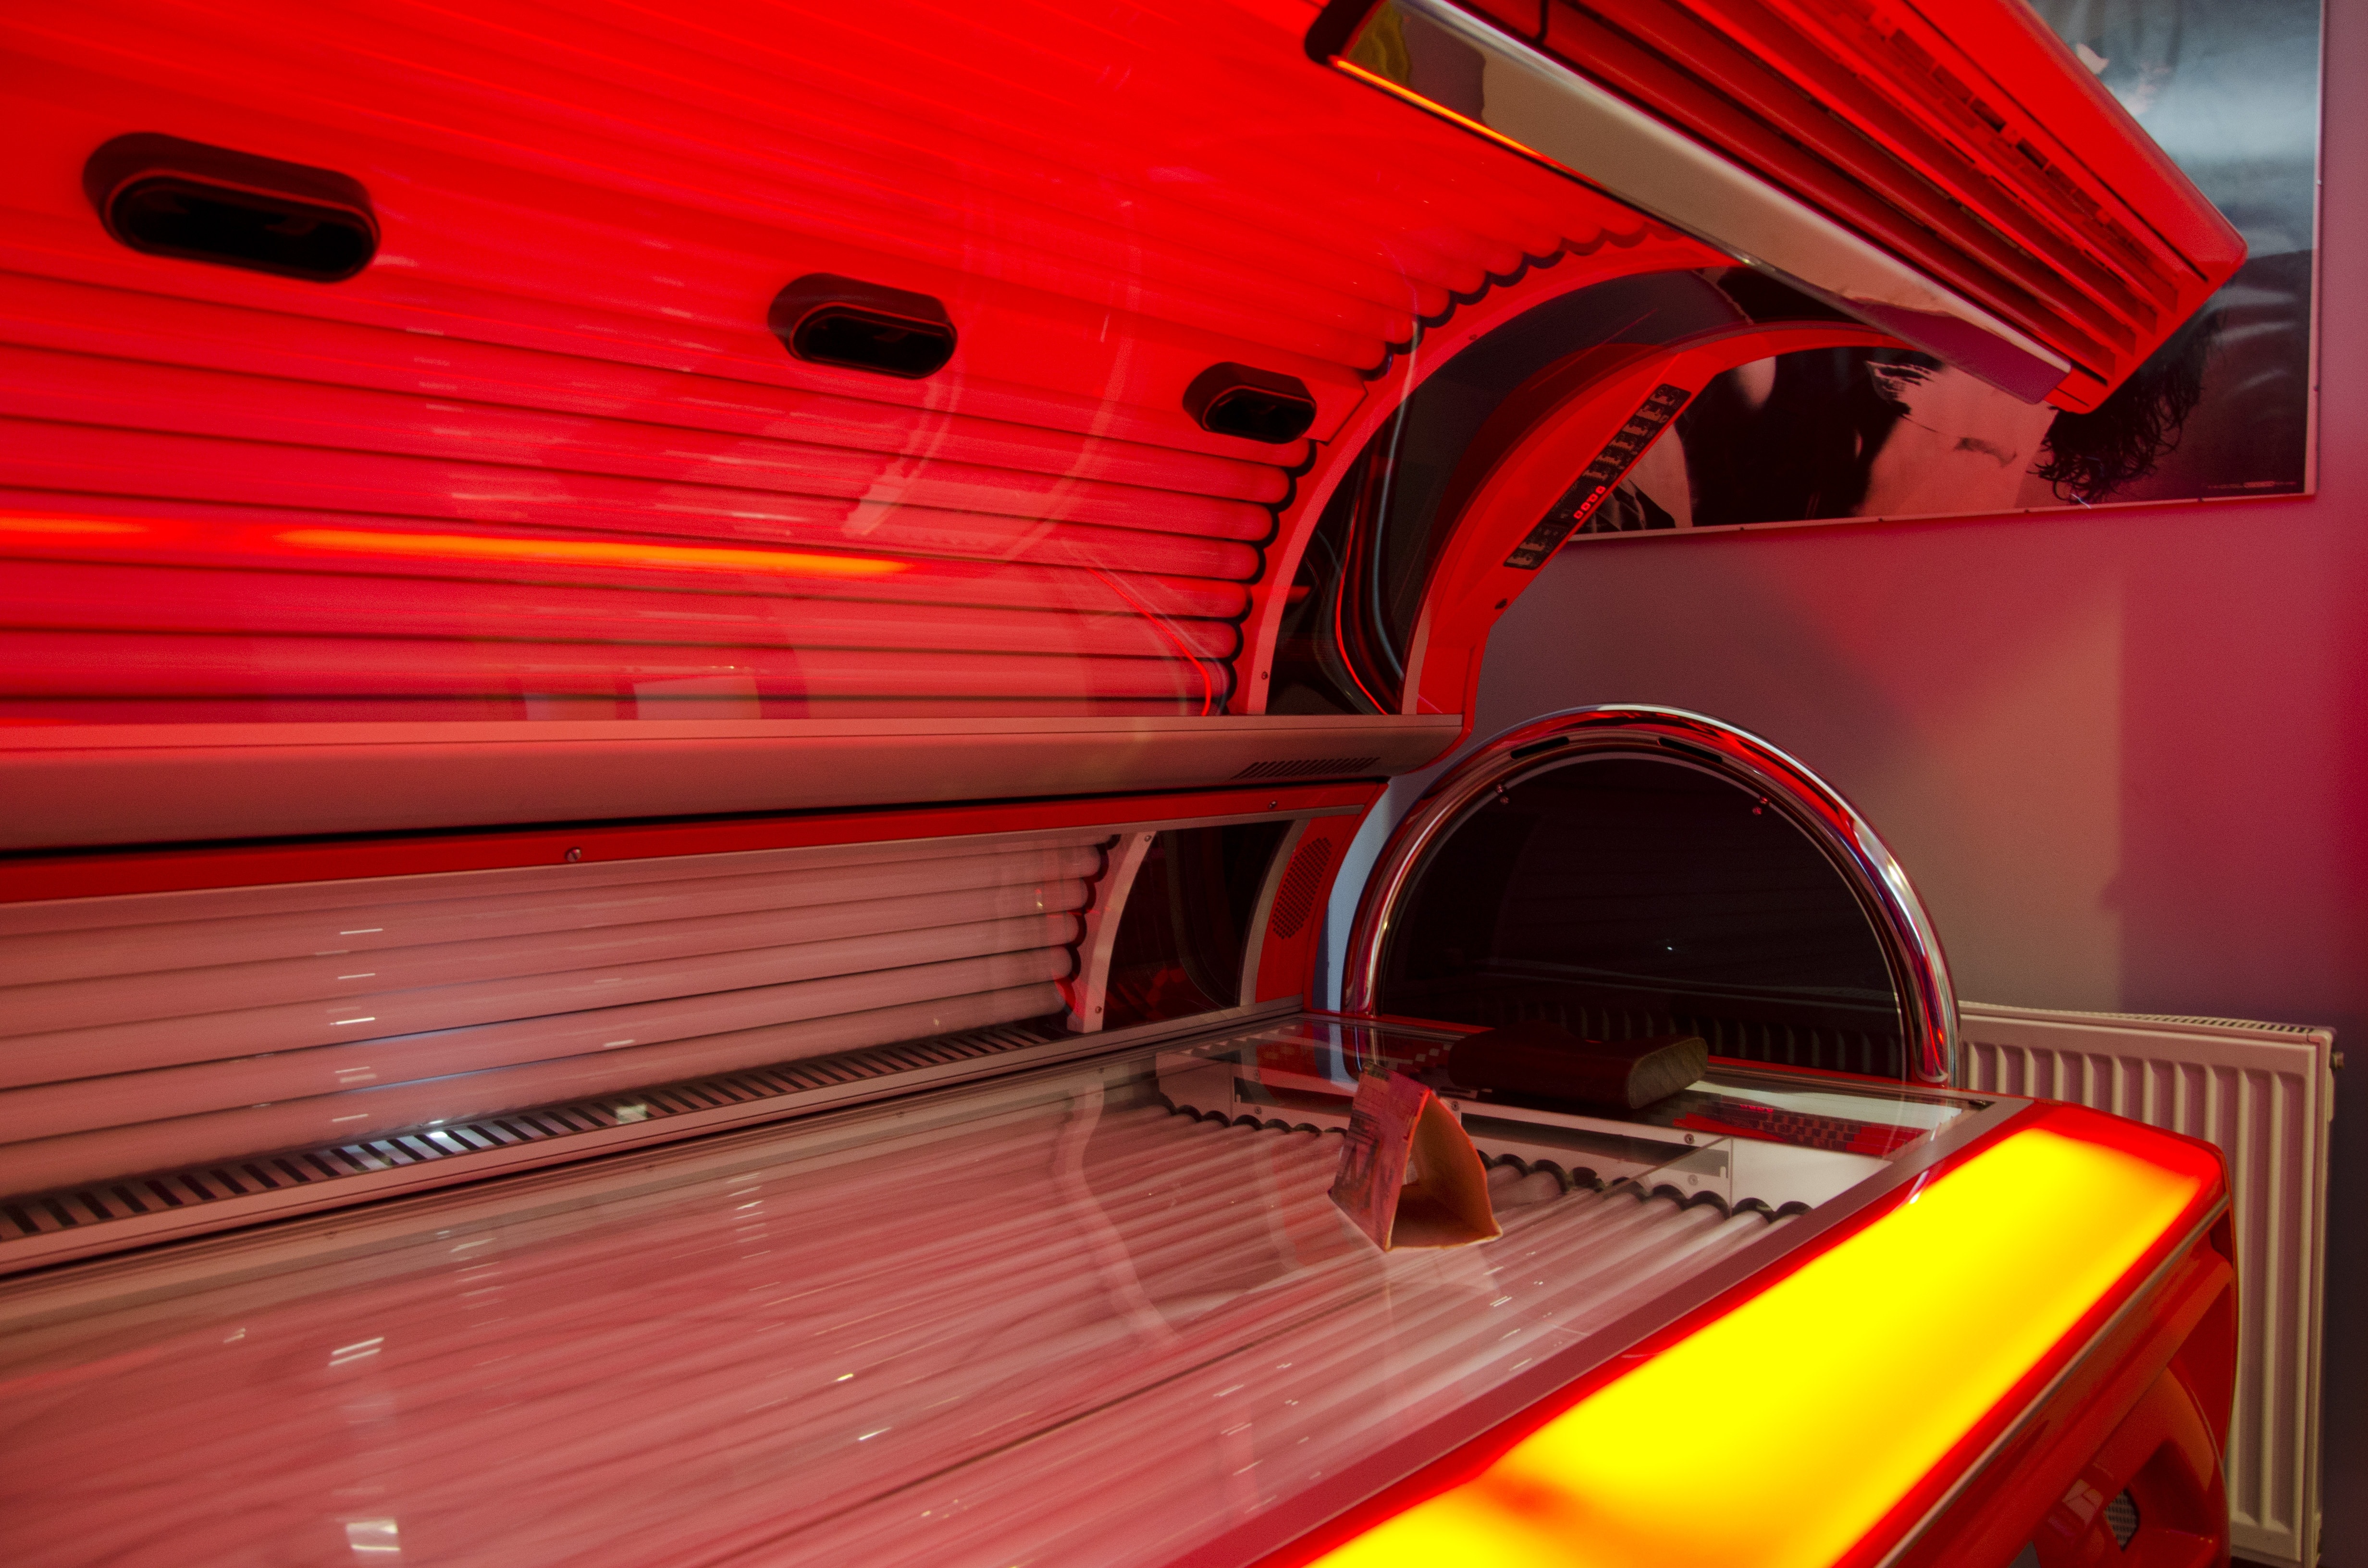 Tanning, Solarium, Beauty Parlor, red, arch